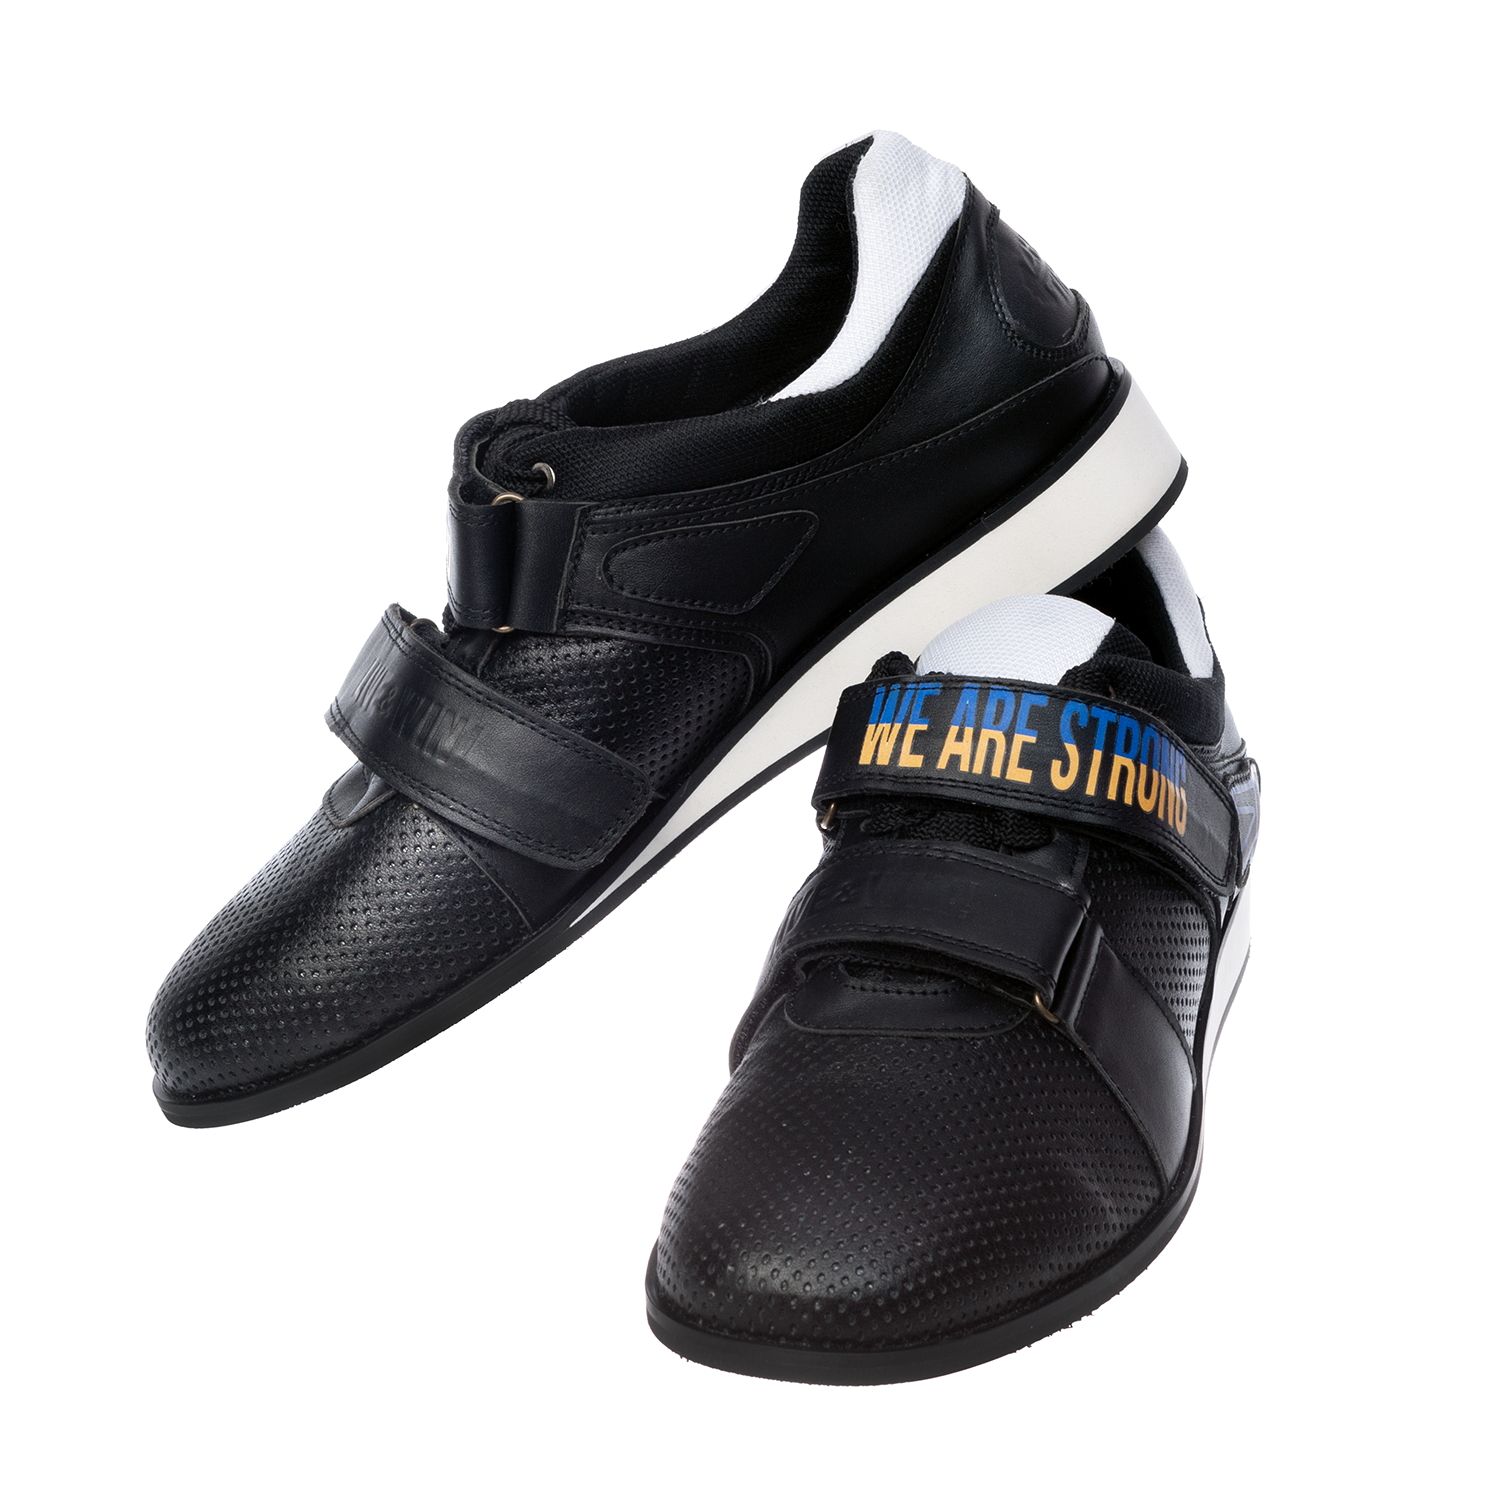 Weightlifting shoes  We are strong, black, size 42 (UKR)